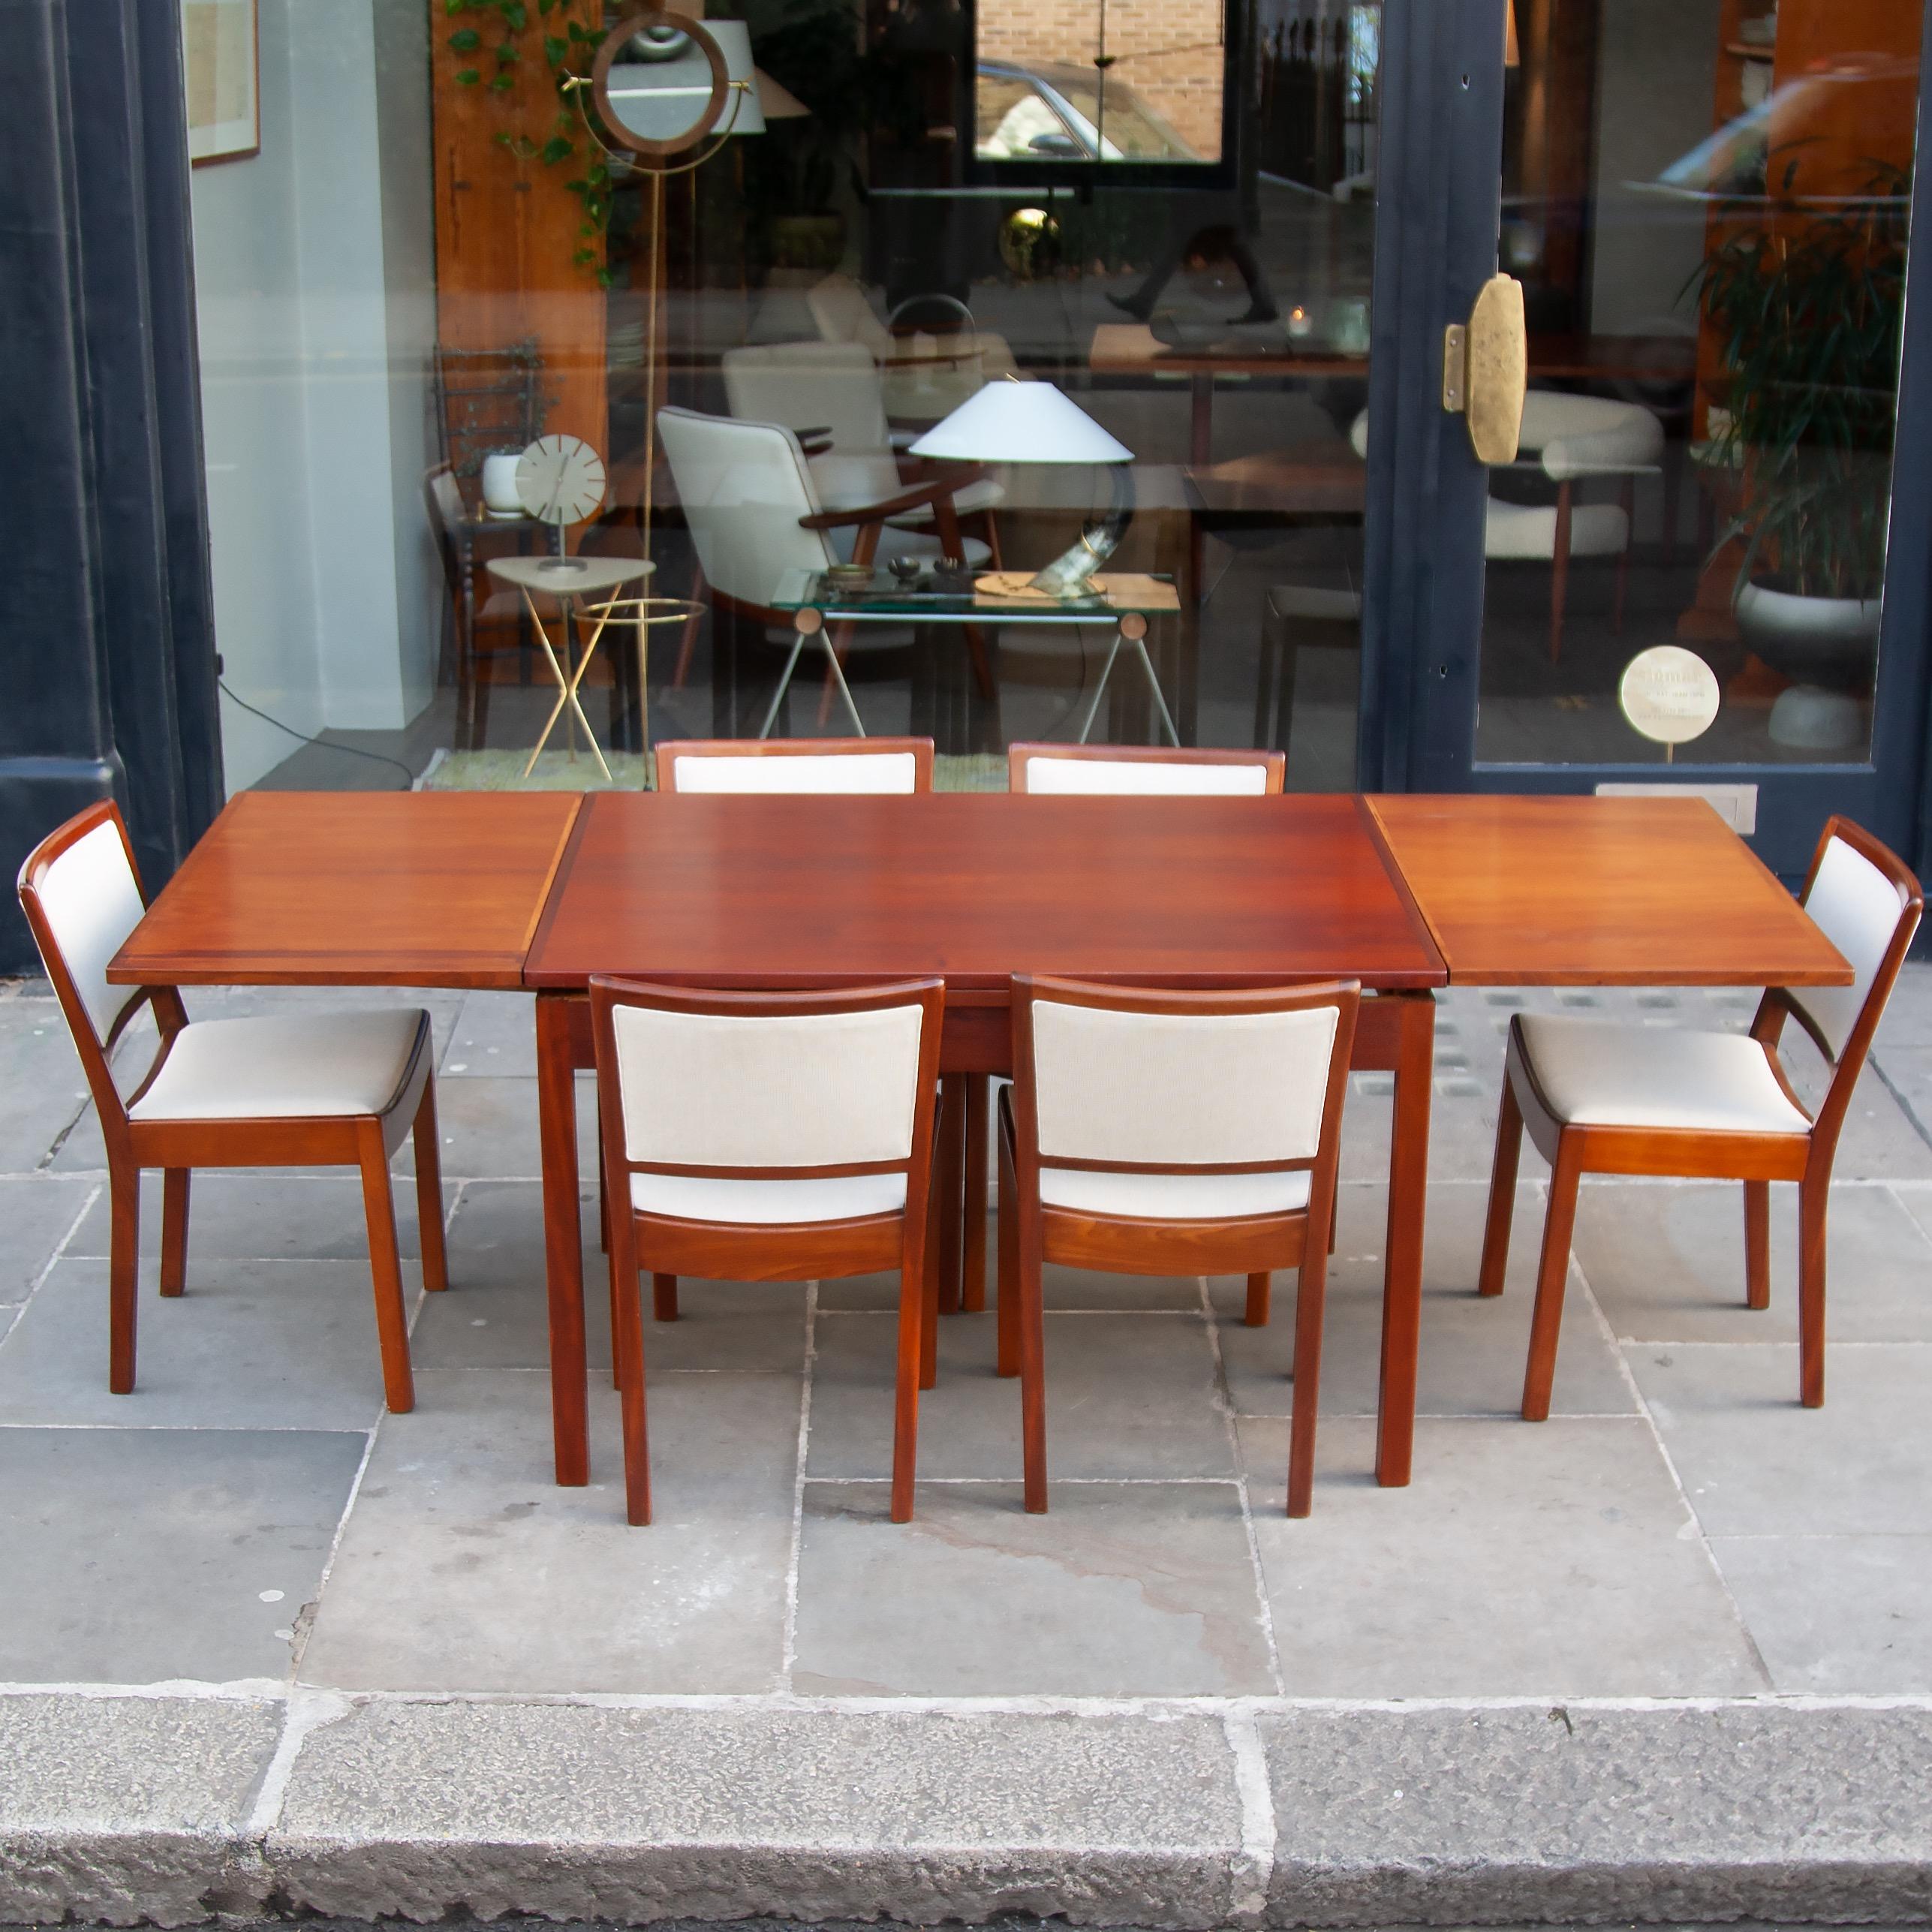 A beautiful solid Danish mahogany dining table and set of six chairs - exceptionally rare. Designed by Tove and Edvard Kindt Larsen, c. 1935. 

This is a particularly interesting example of a collaborative venture between Tove and Edvard